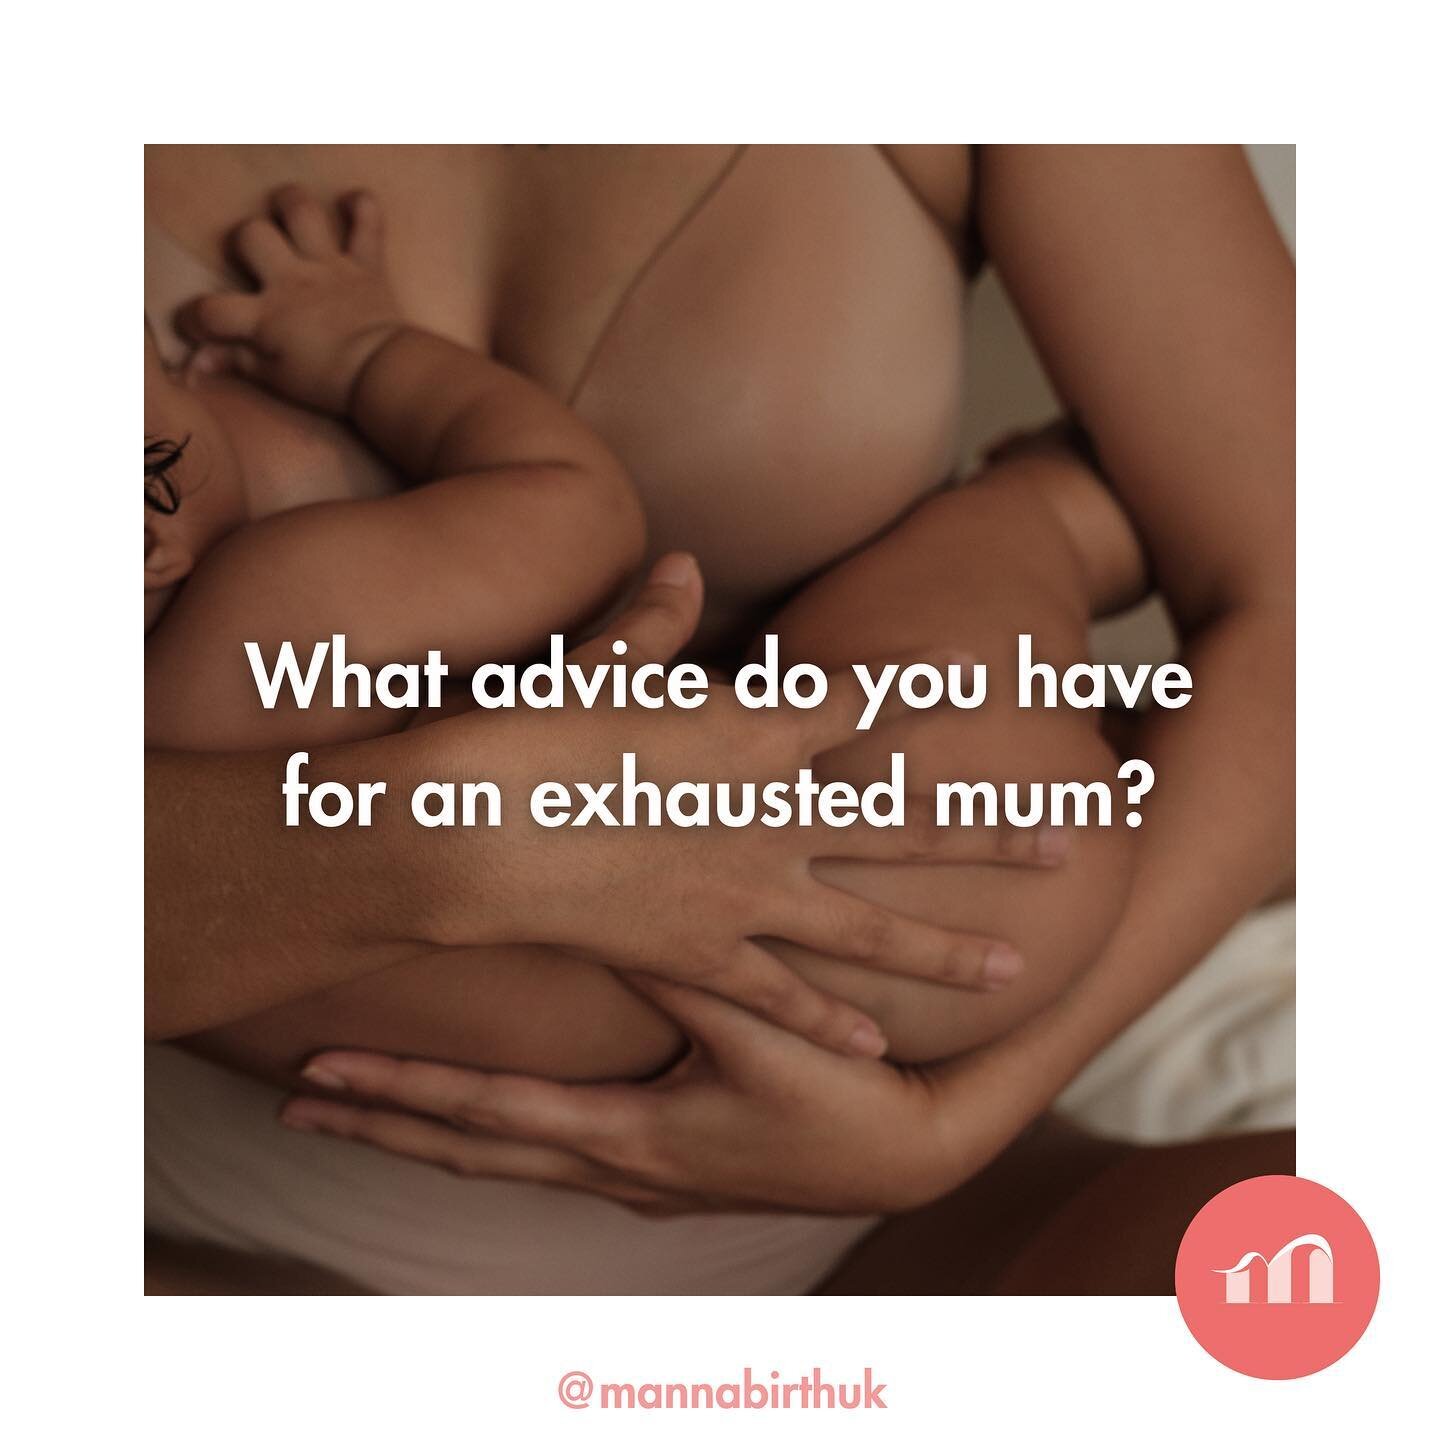 It&rsquo;s that time again where we turn to this community to support and encourage each other&hellip; Comment your advice, support and encouragement below, or tag a friend who needs it! 💜
.
.
.
#exhaustedmummy #motherhood #doula #londondoula #postp